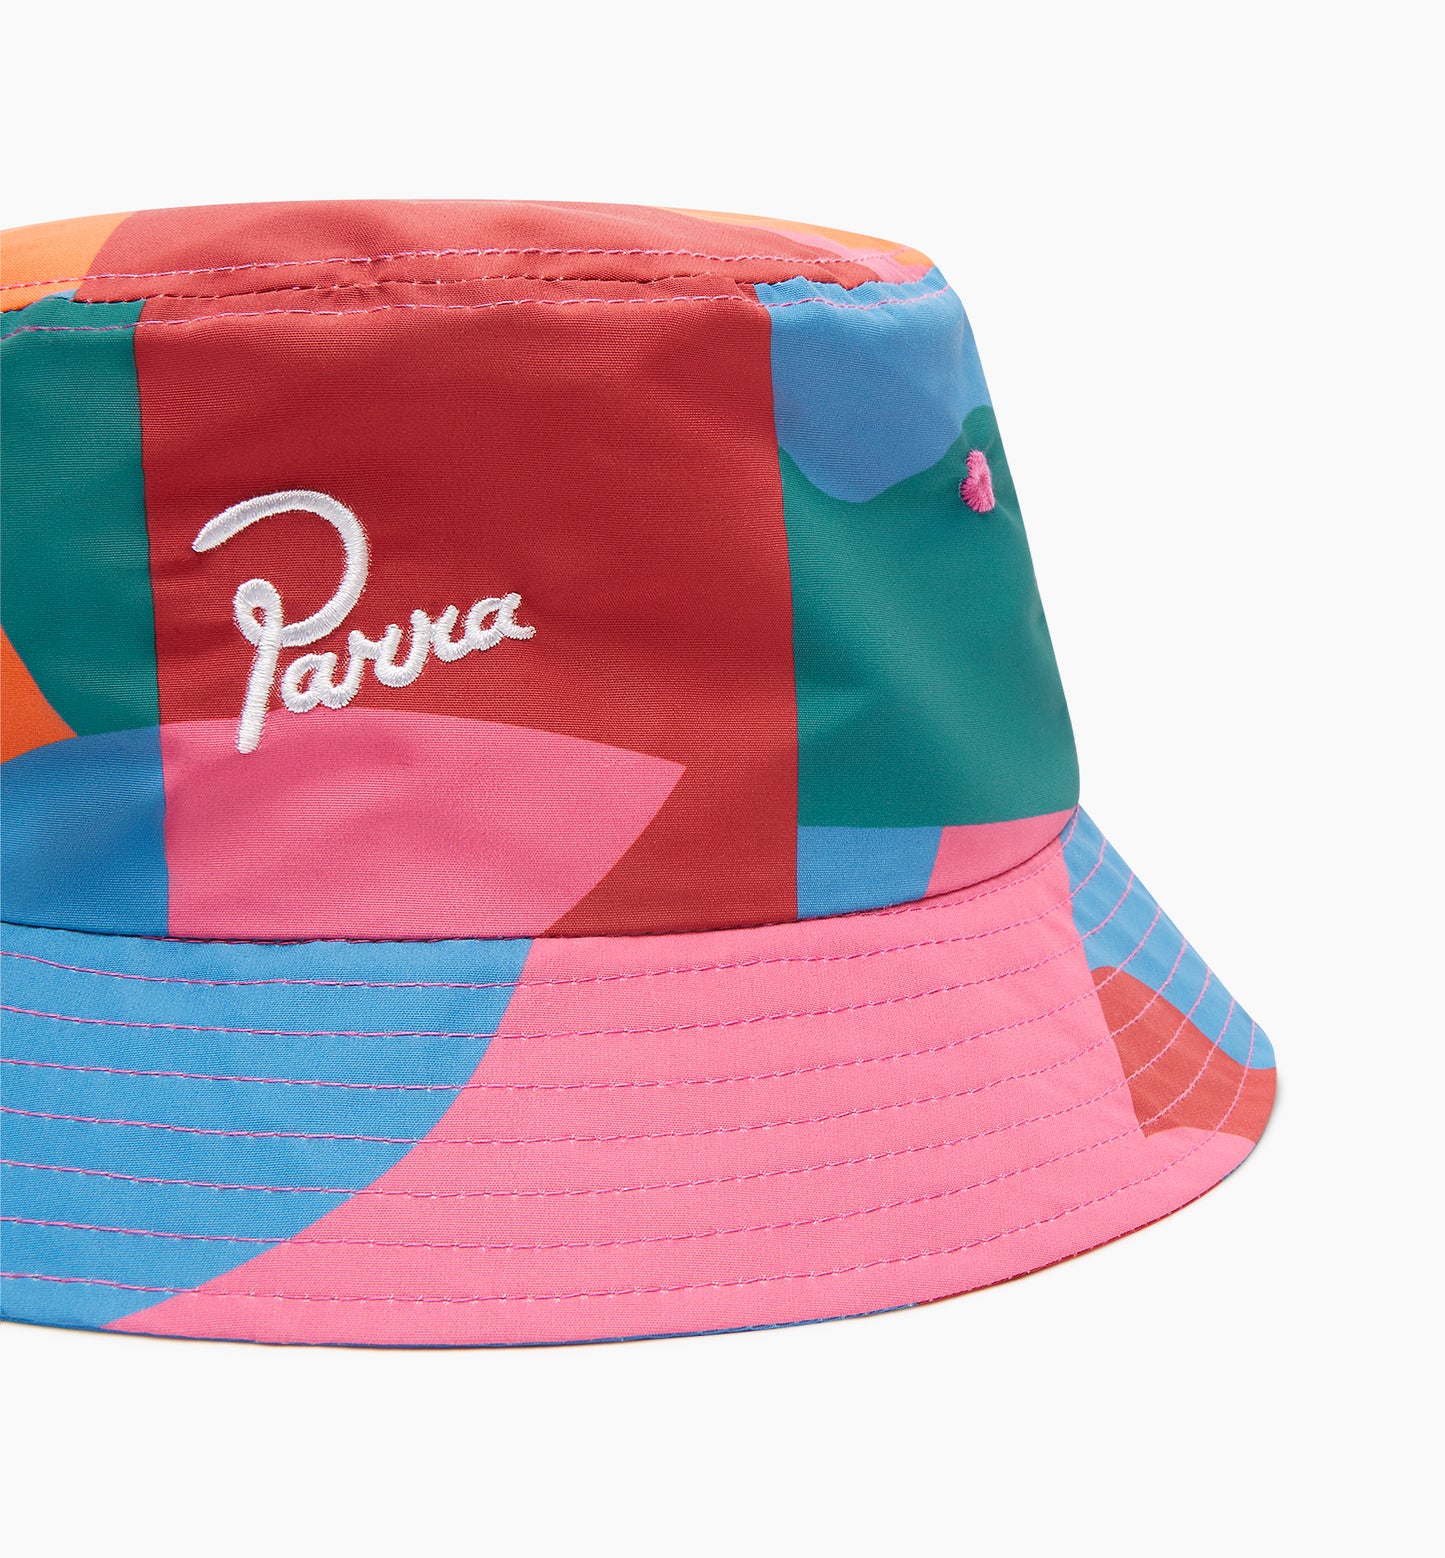 By Parra Sitting Pear Bucket Hat